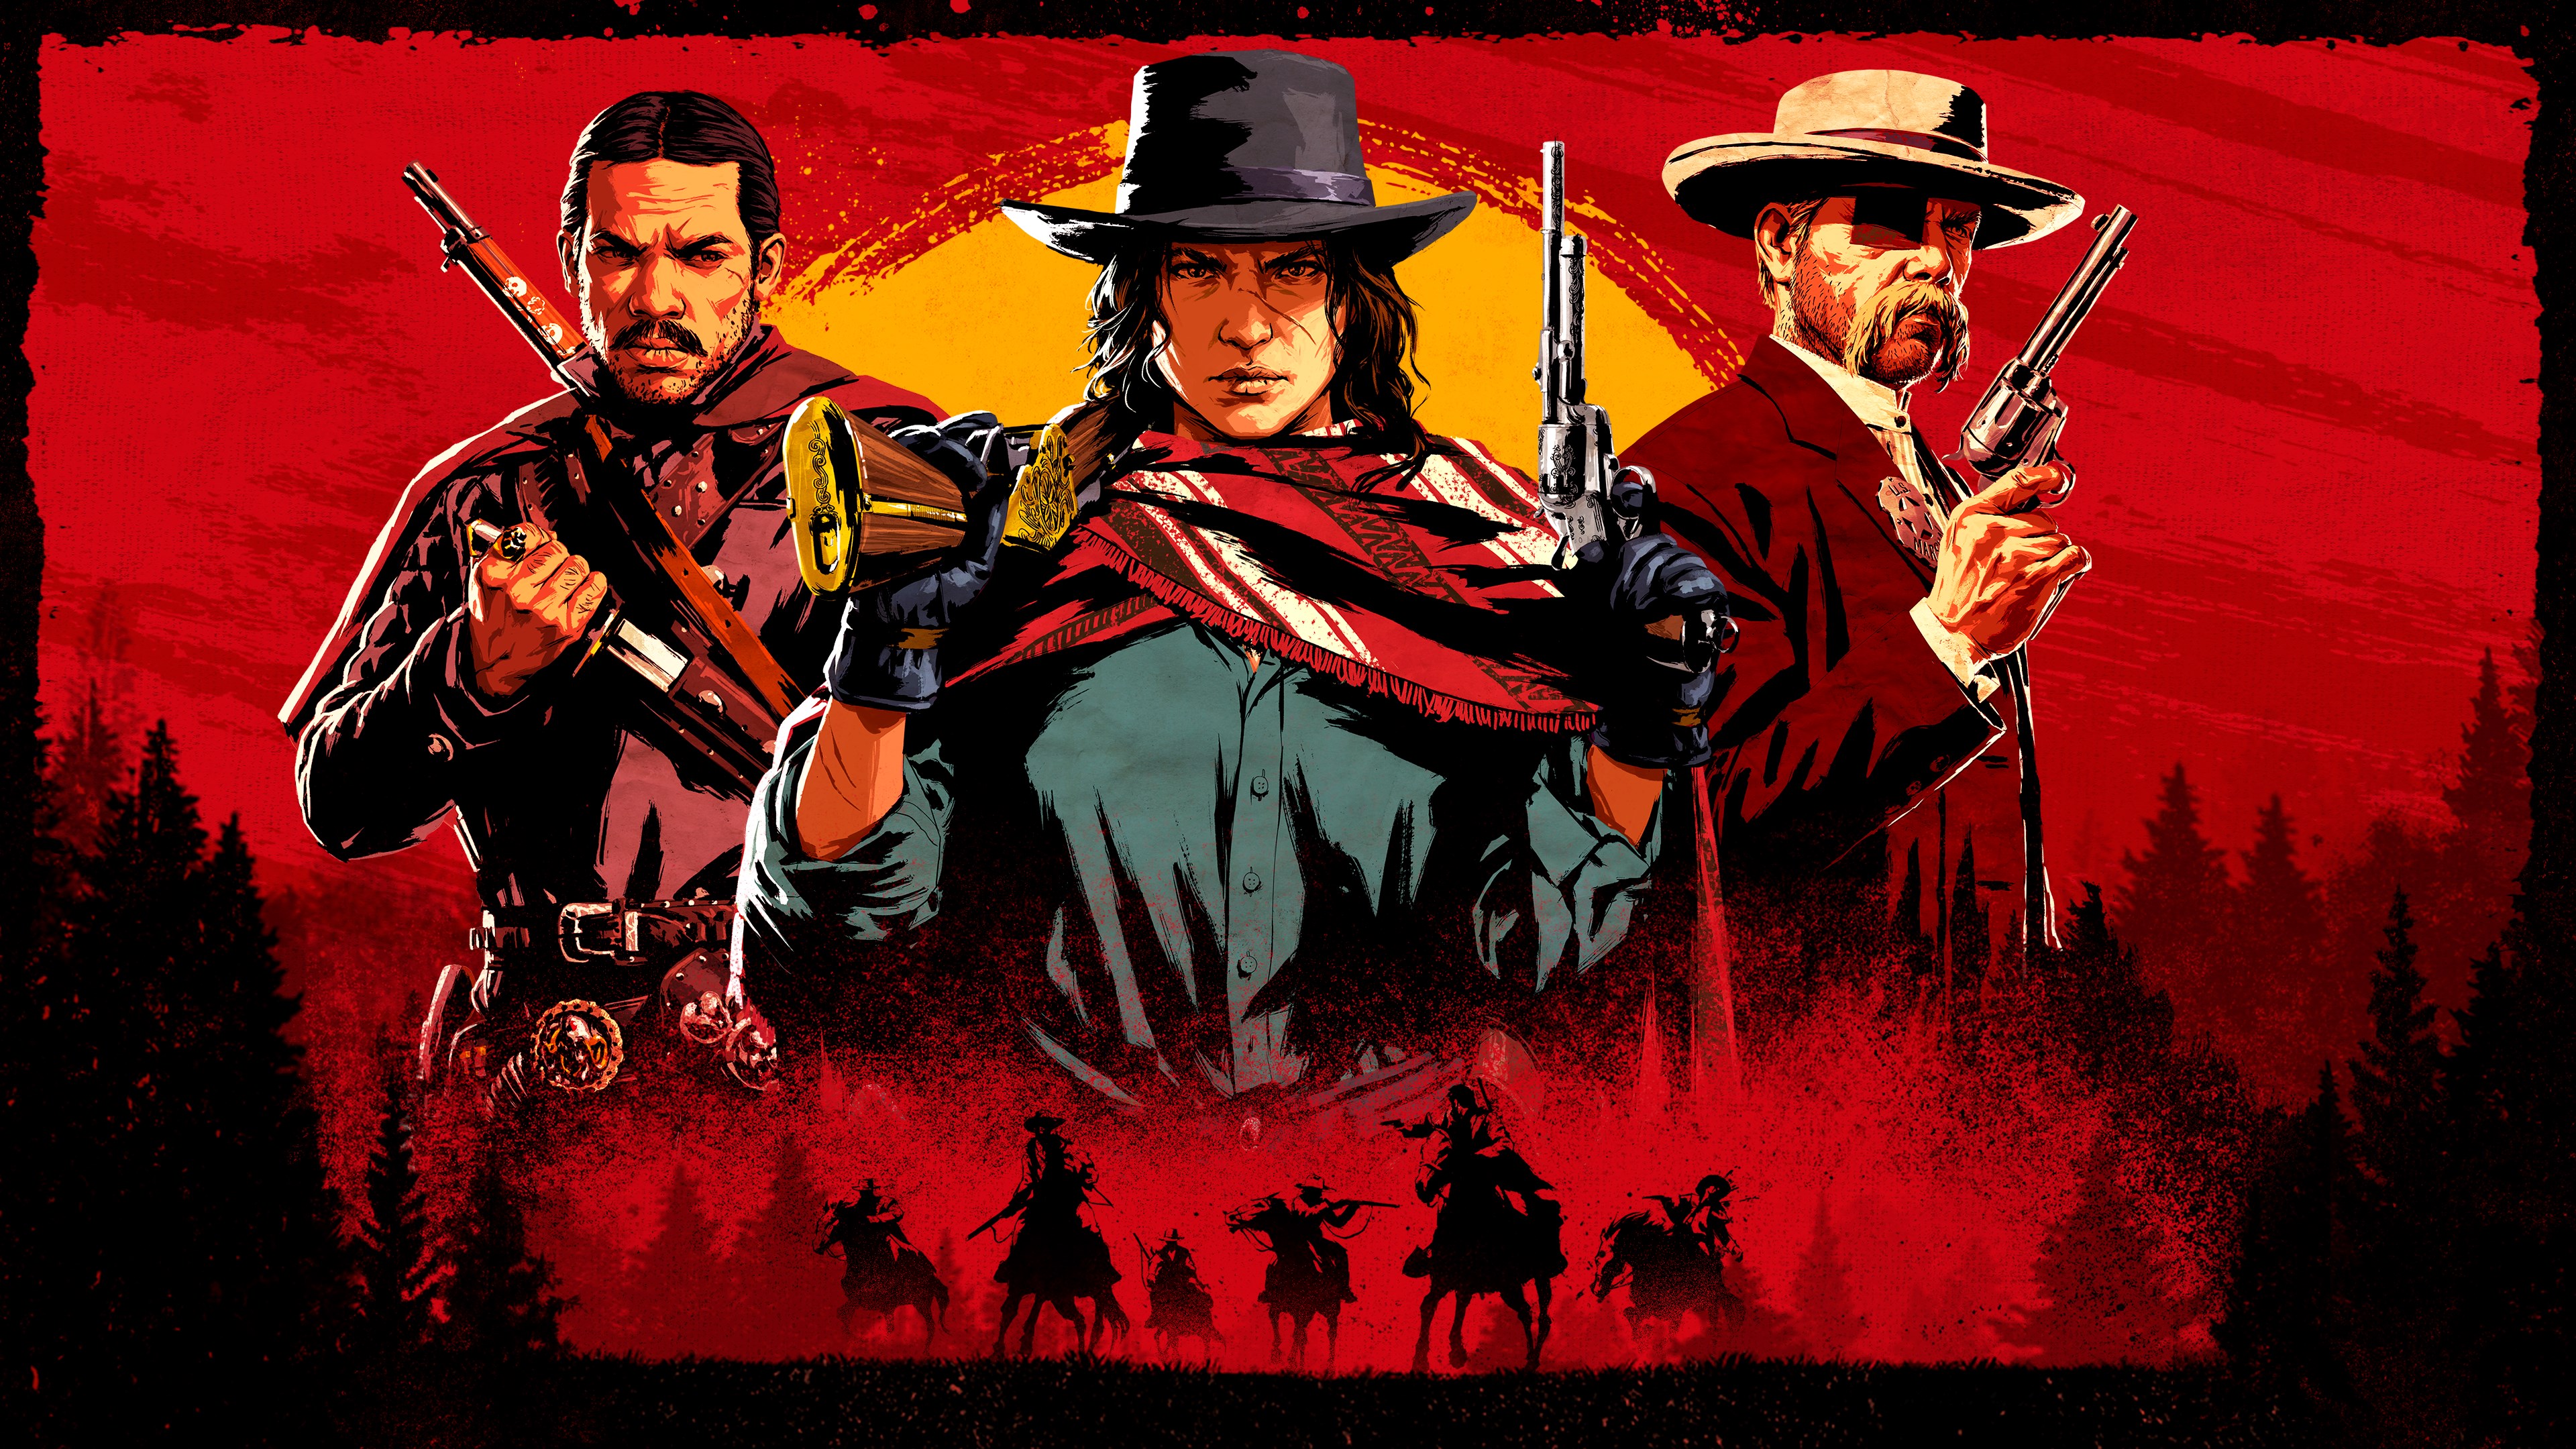 red dead redemption 2 microsoft store